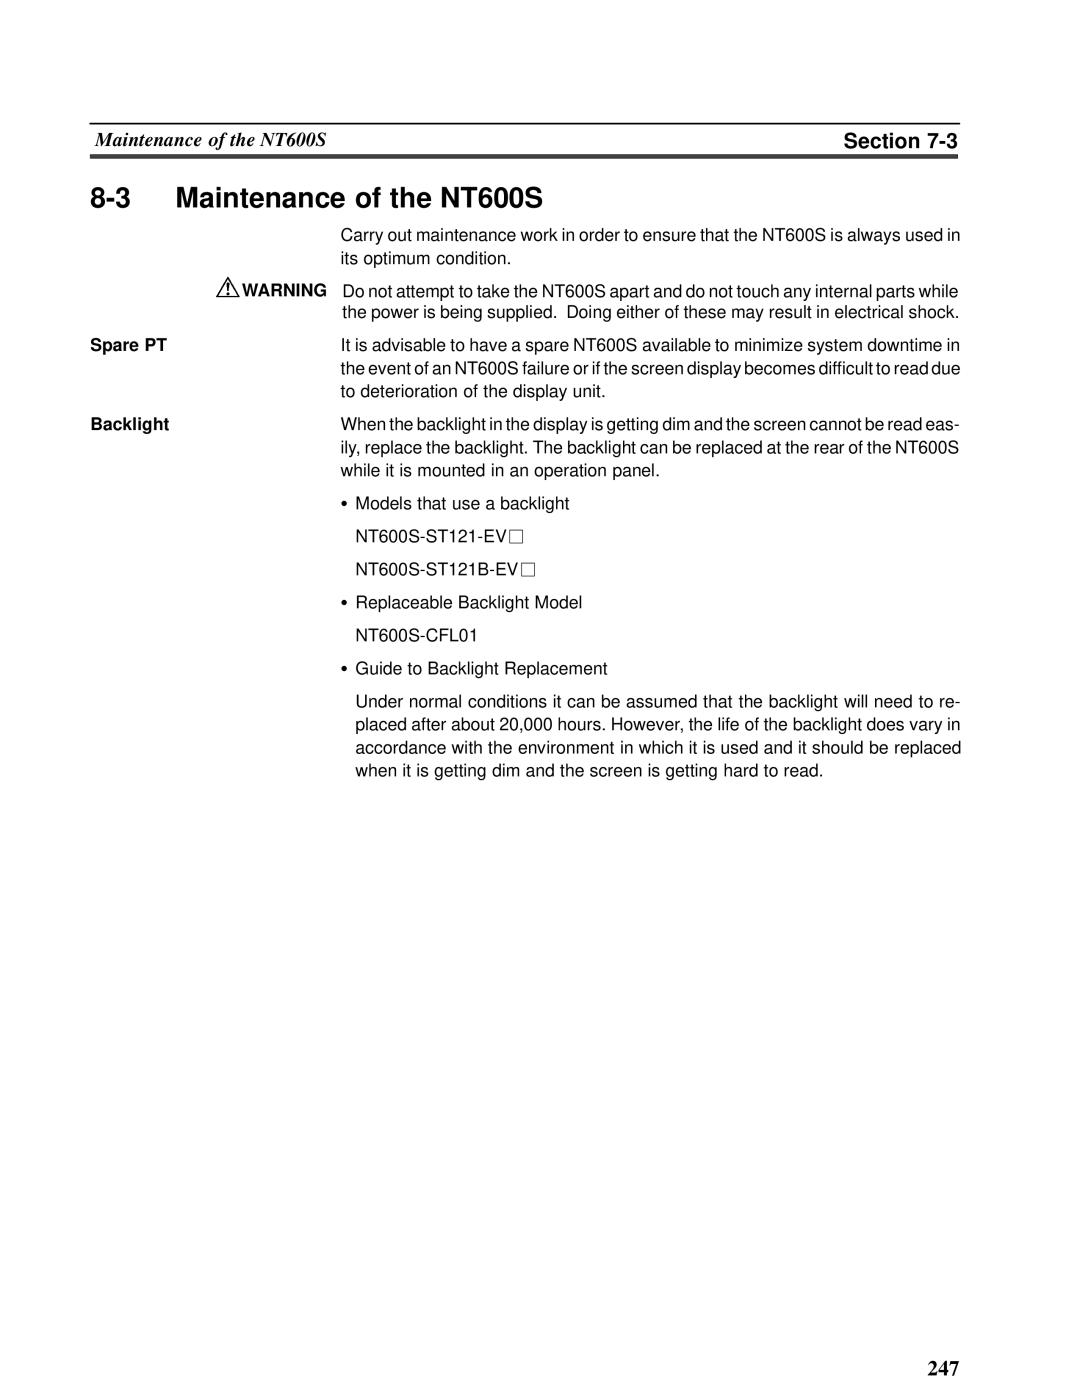 Omron V022-E3-1 operation manual 8-3Maintenance of the NT600S, Section, Spare PT, Backlight 